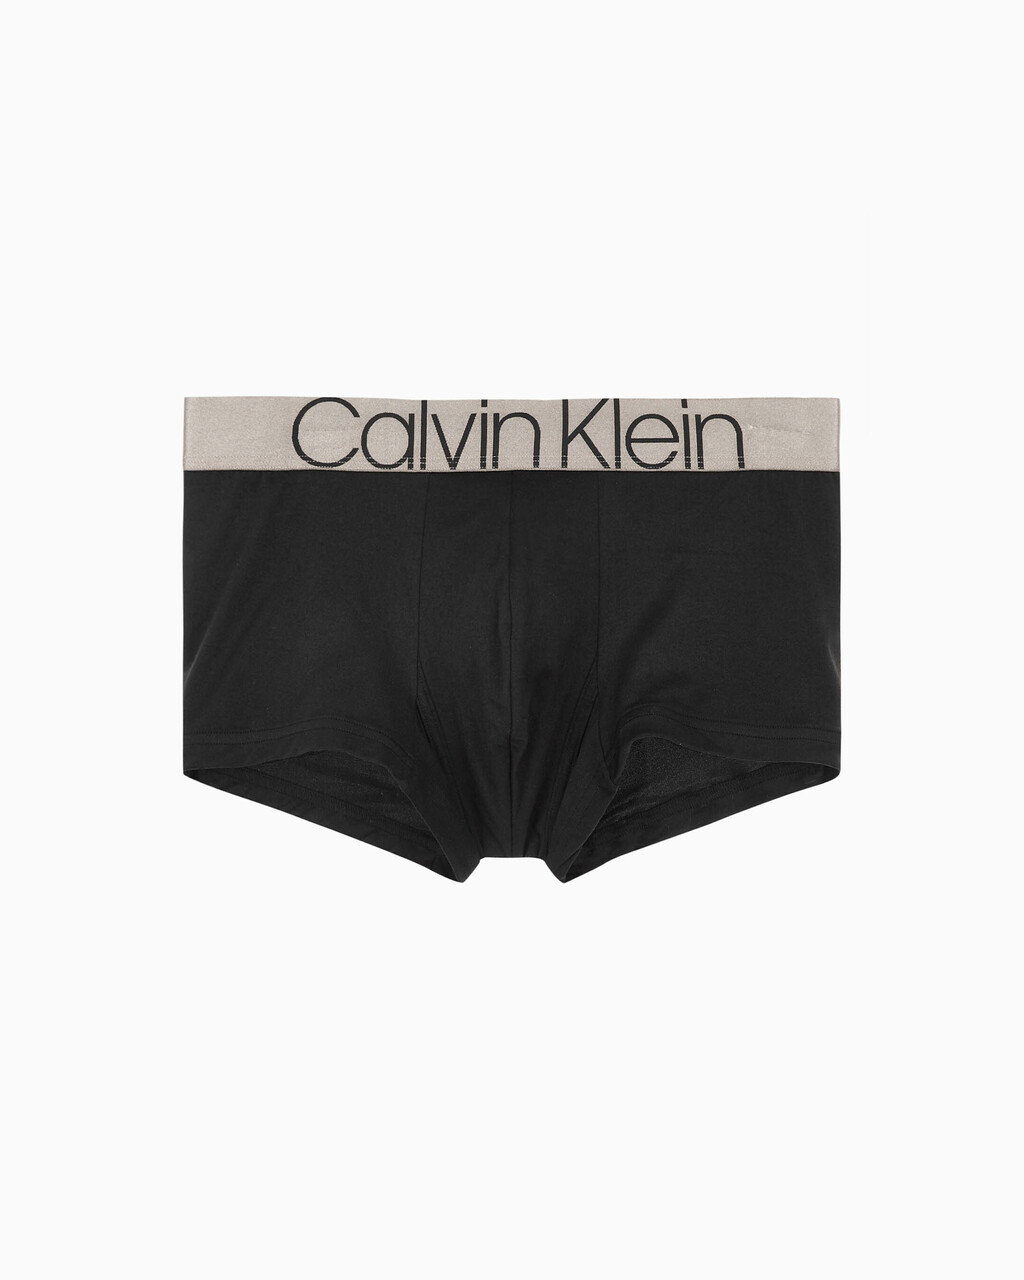 ICON MICRO LOW RISE TRUNKS, Black, hi-res